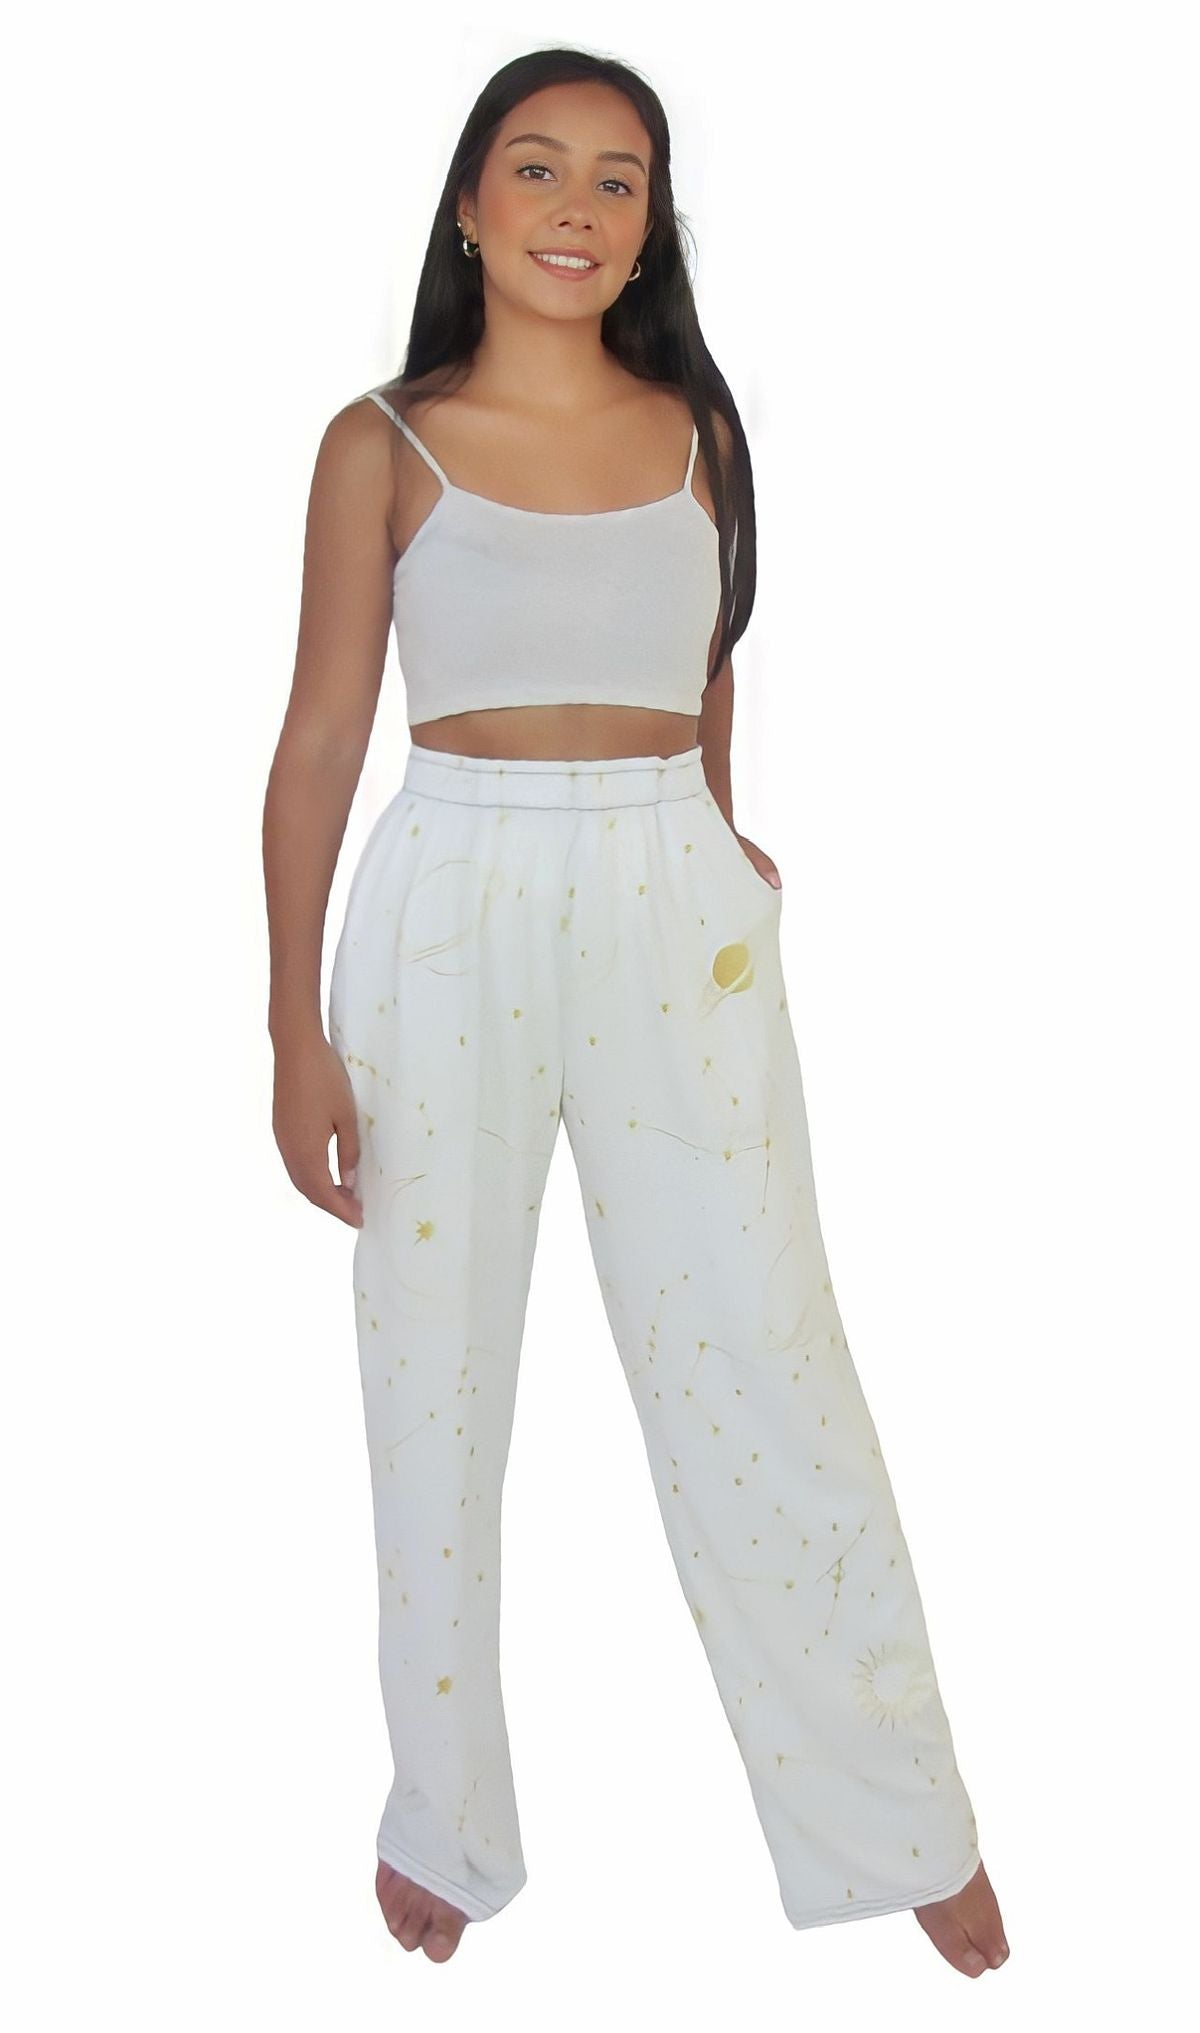 Astral design in white and gold unisex wide-leg pants - The Space Store